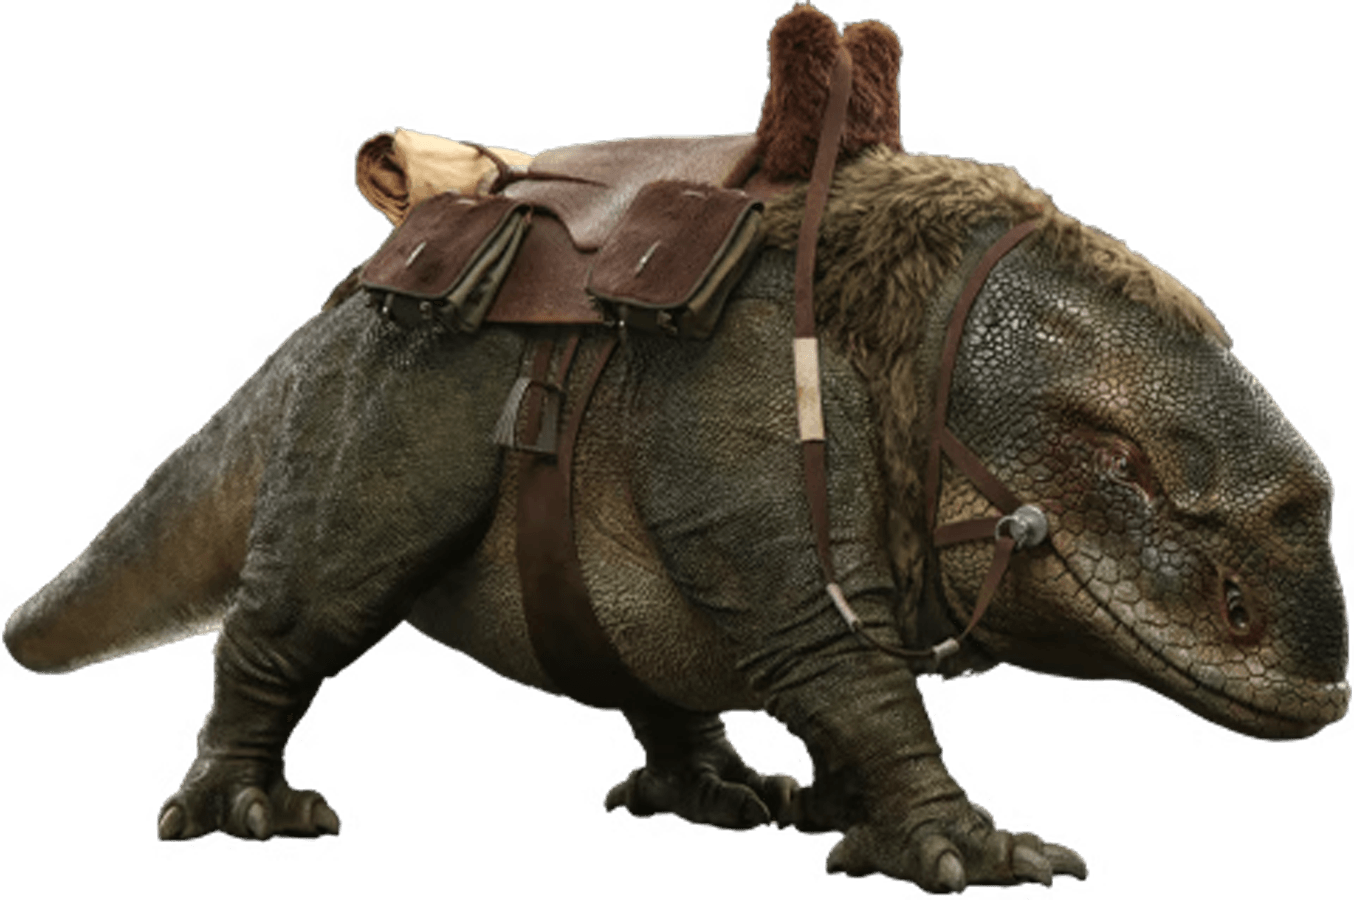 Star Wars - Dewback Deluxe 1:6 Scale Collectable Figure Action figures by Hot Toys | Titan Pop Culture